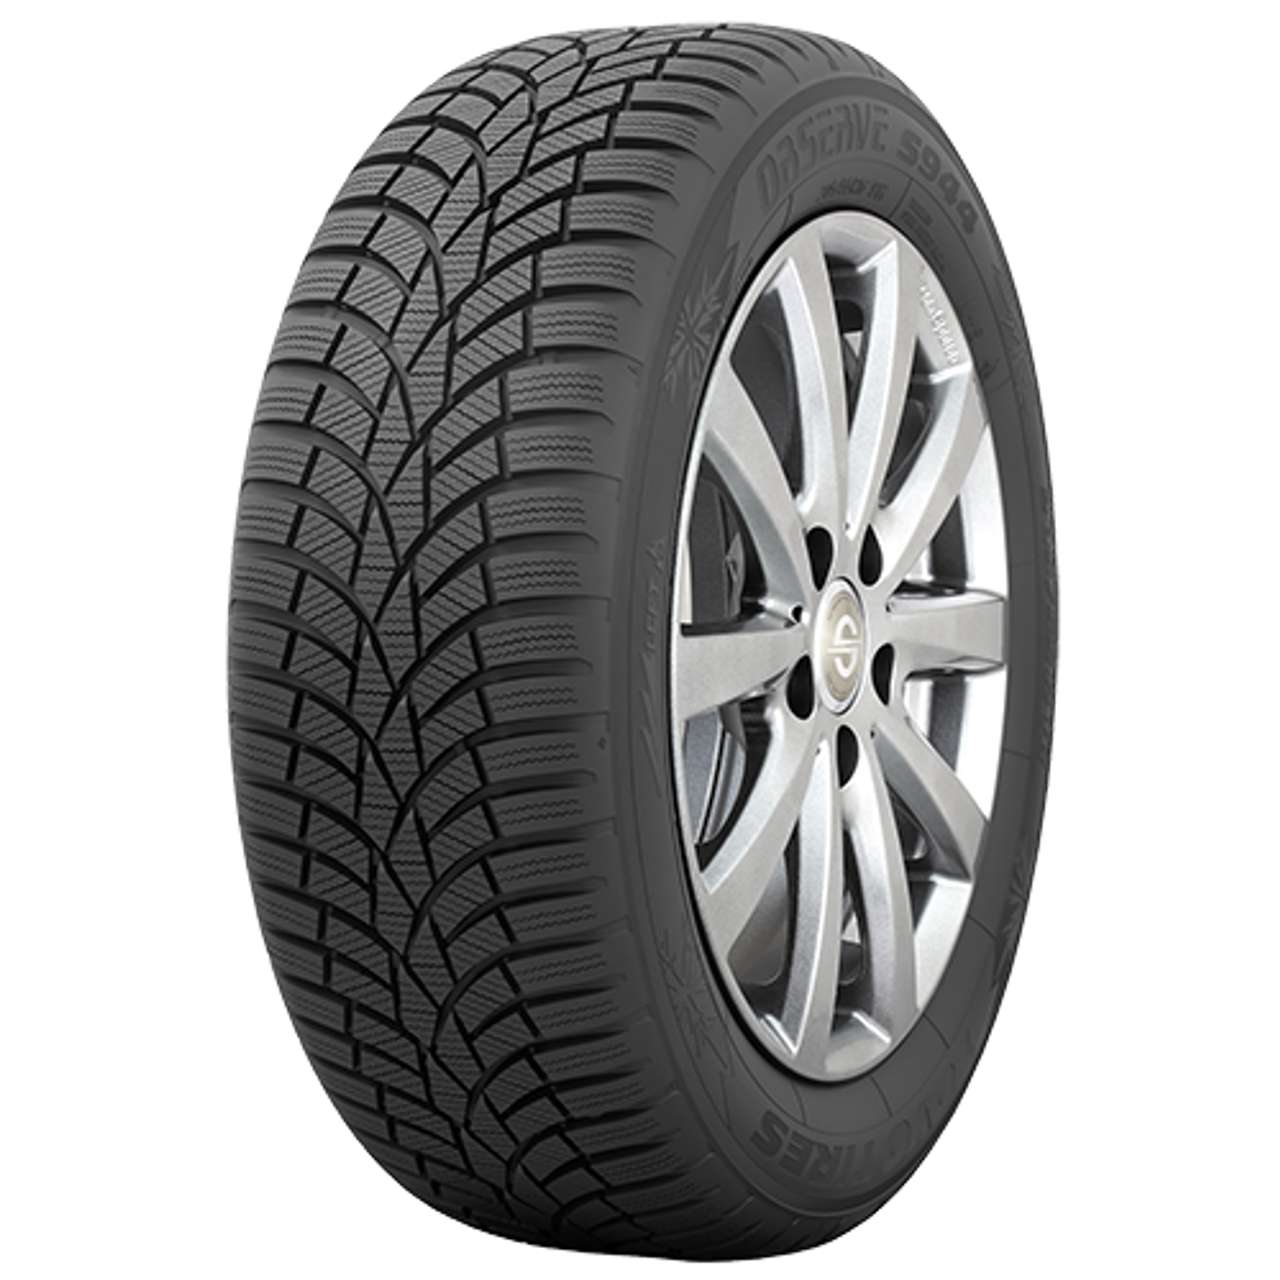 TOYO OBSERVE S944 205/55R17 95V BSW